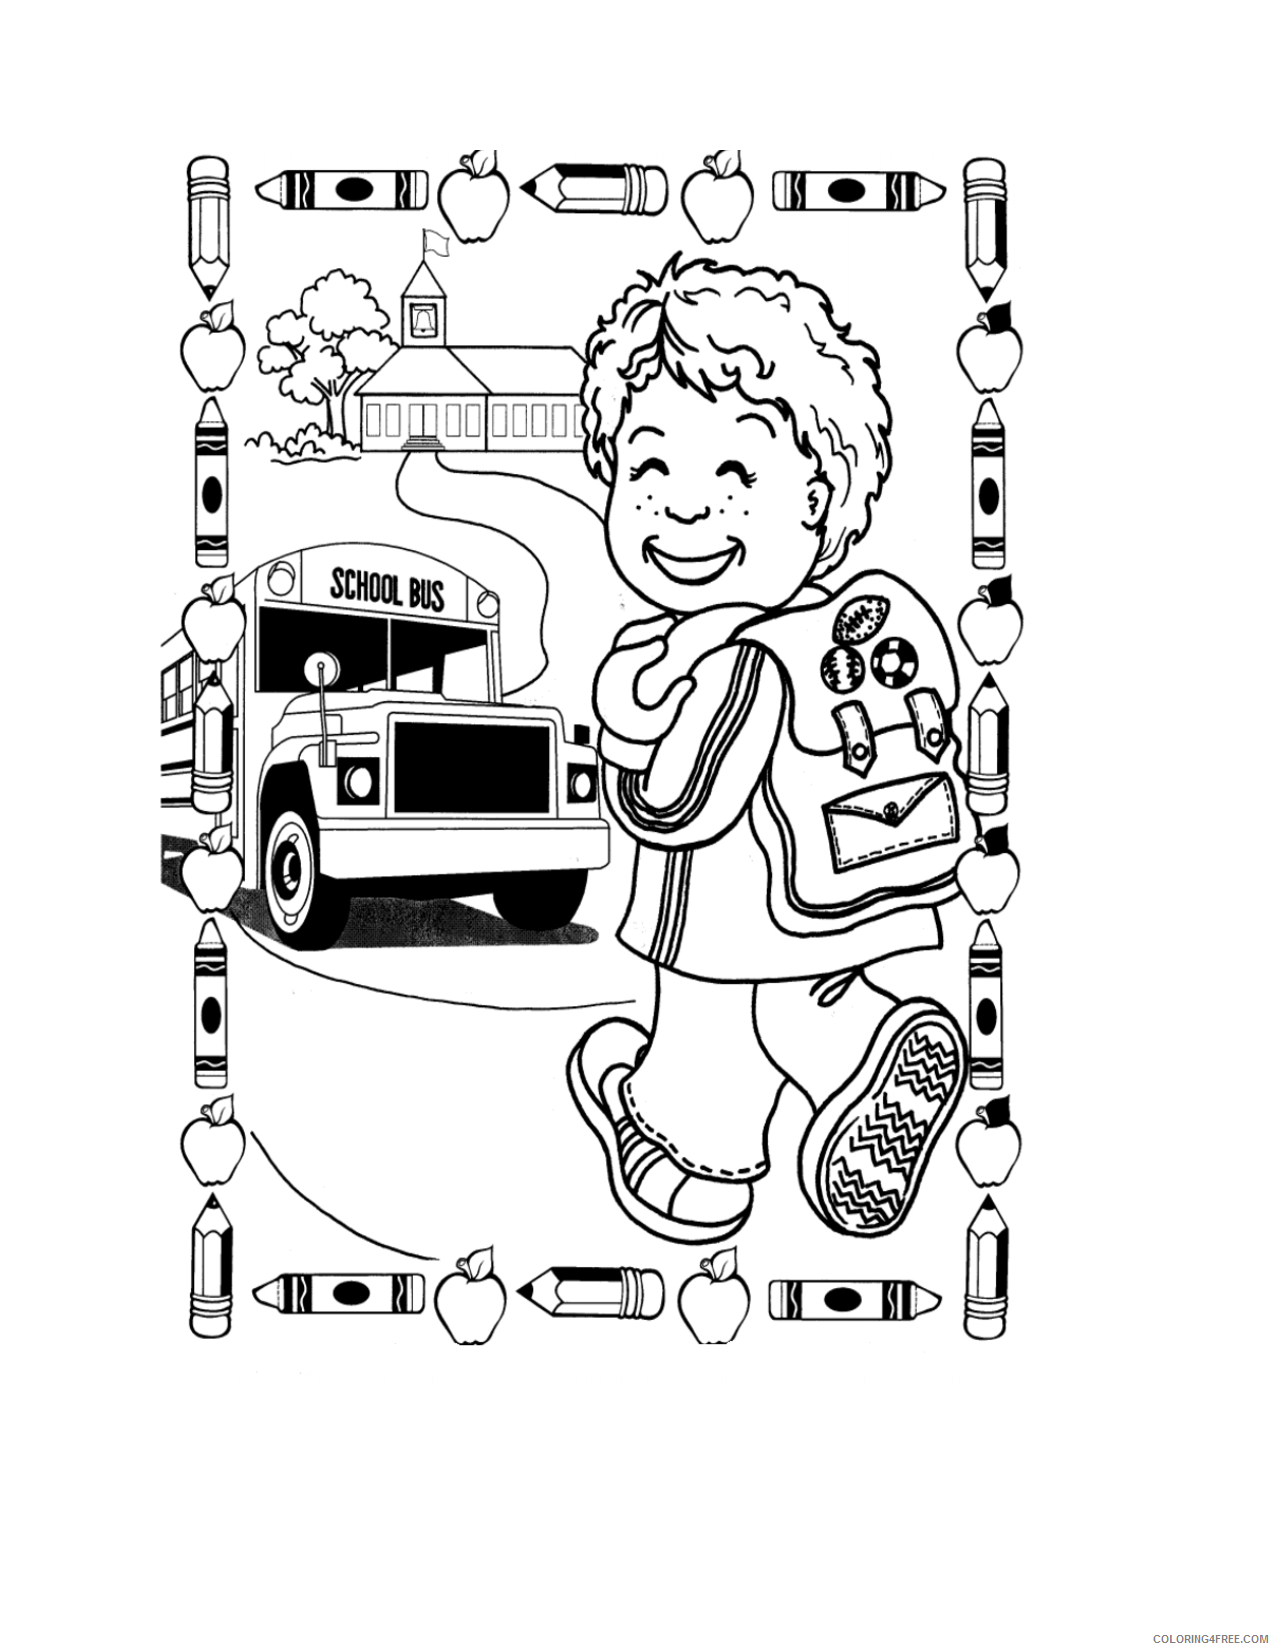 newest-1st-grade-boys-coloring-pages-most-popular-1-single-ester-egg